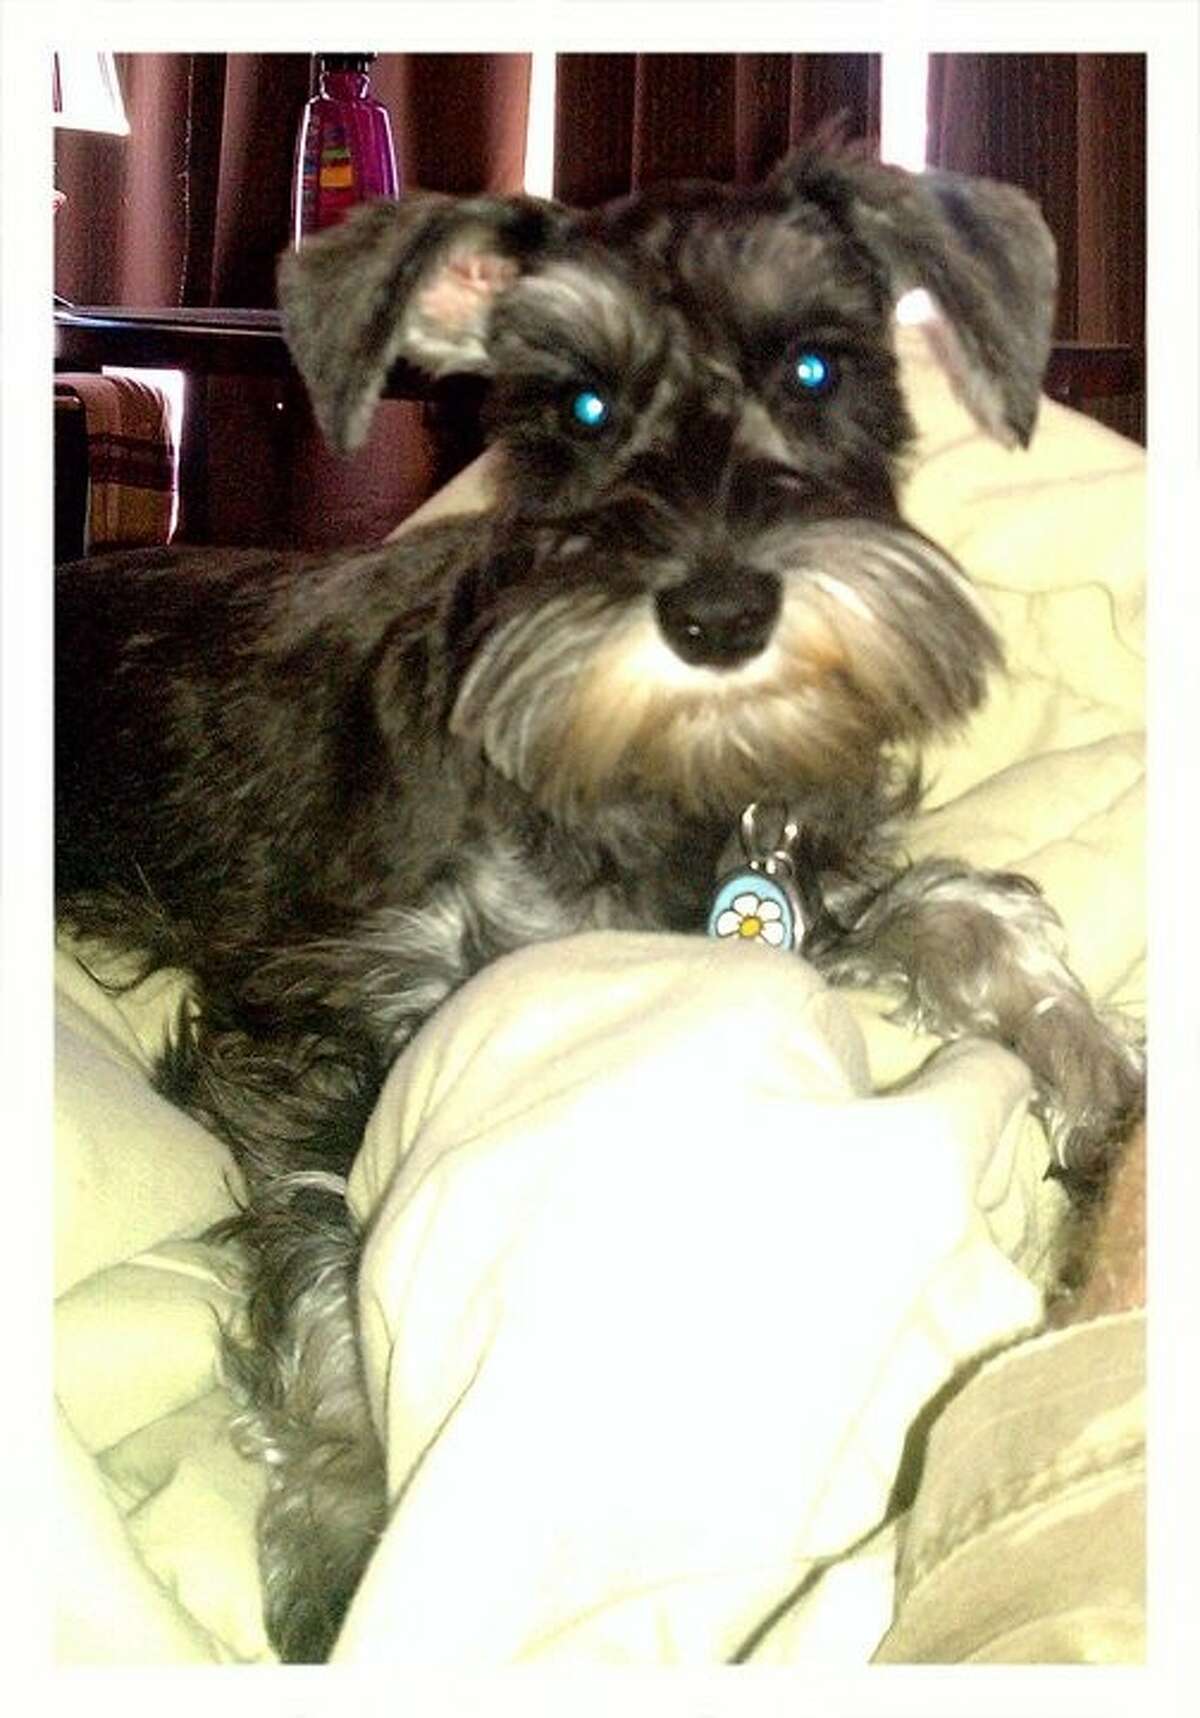 Anabelle, a pure-bred Schnauzer, is a service dog for Samantha Roets.